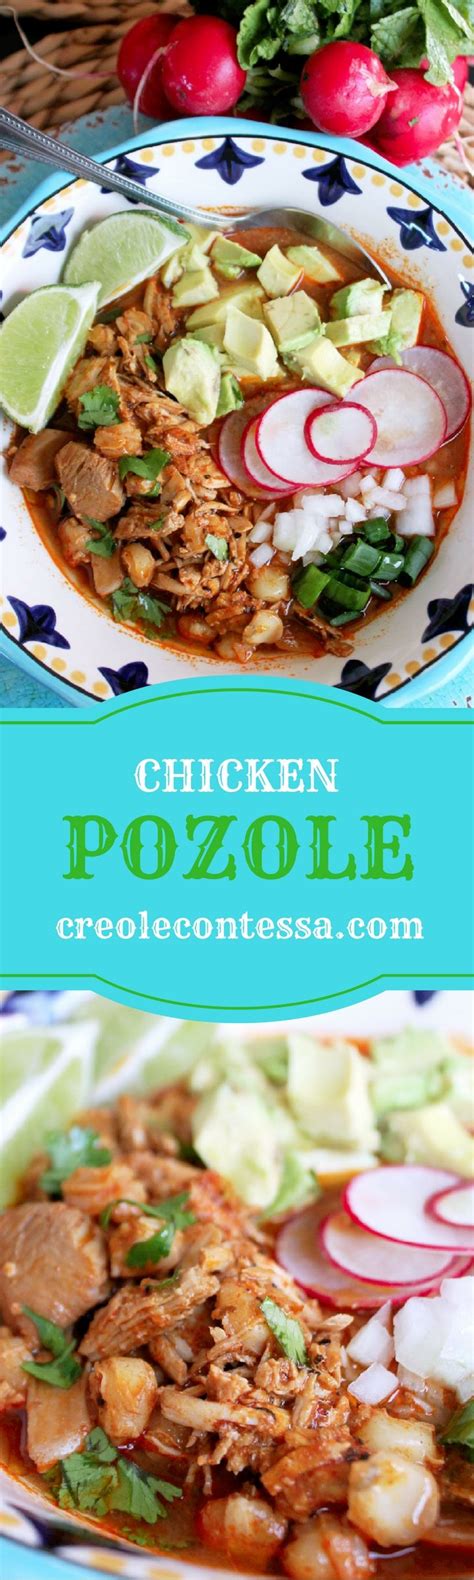 Slow Cooker Chicken Pozole Creole Contessa Slow Cooker Chicken